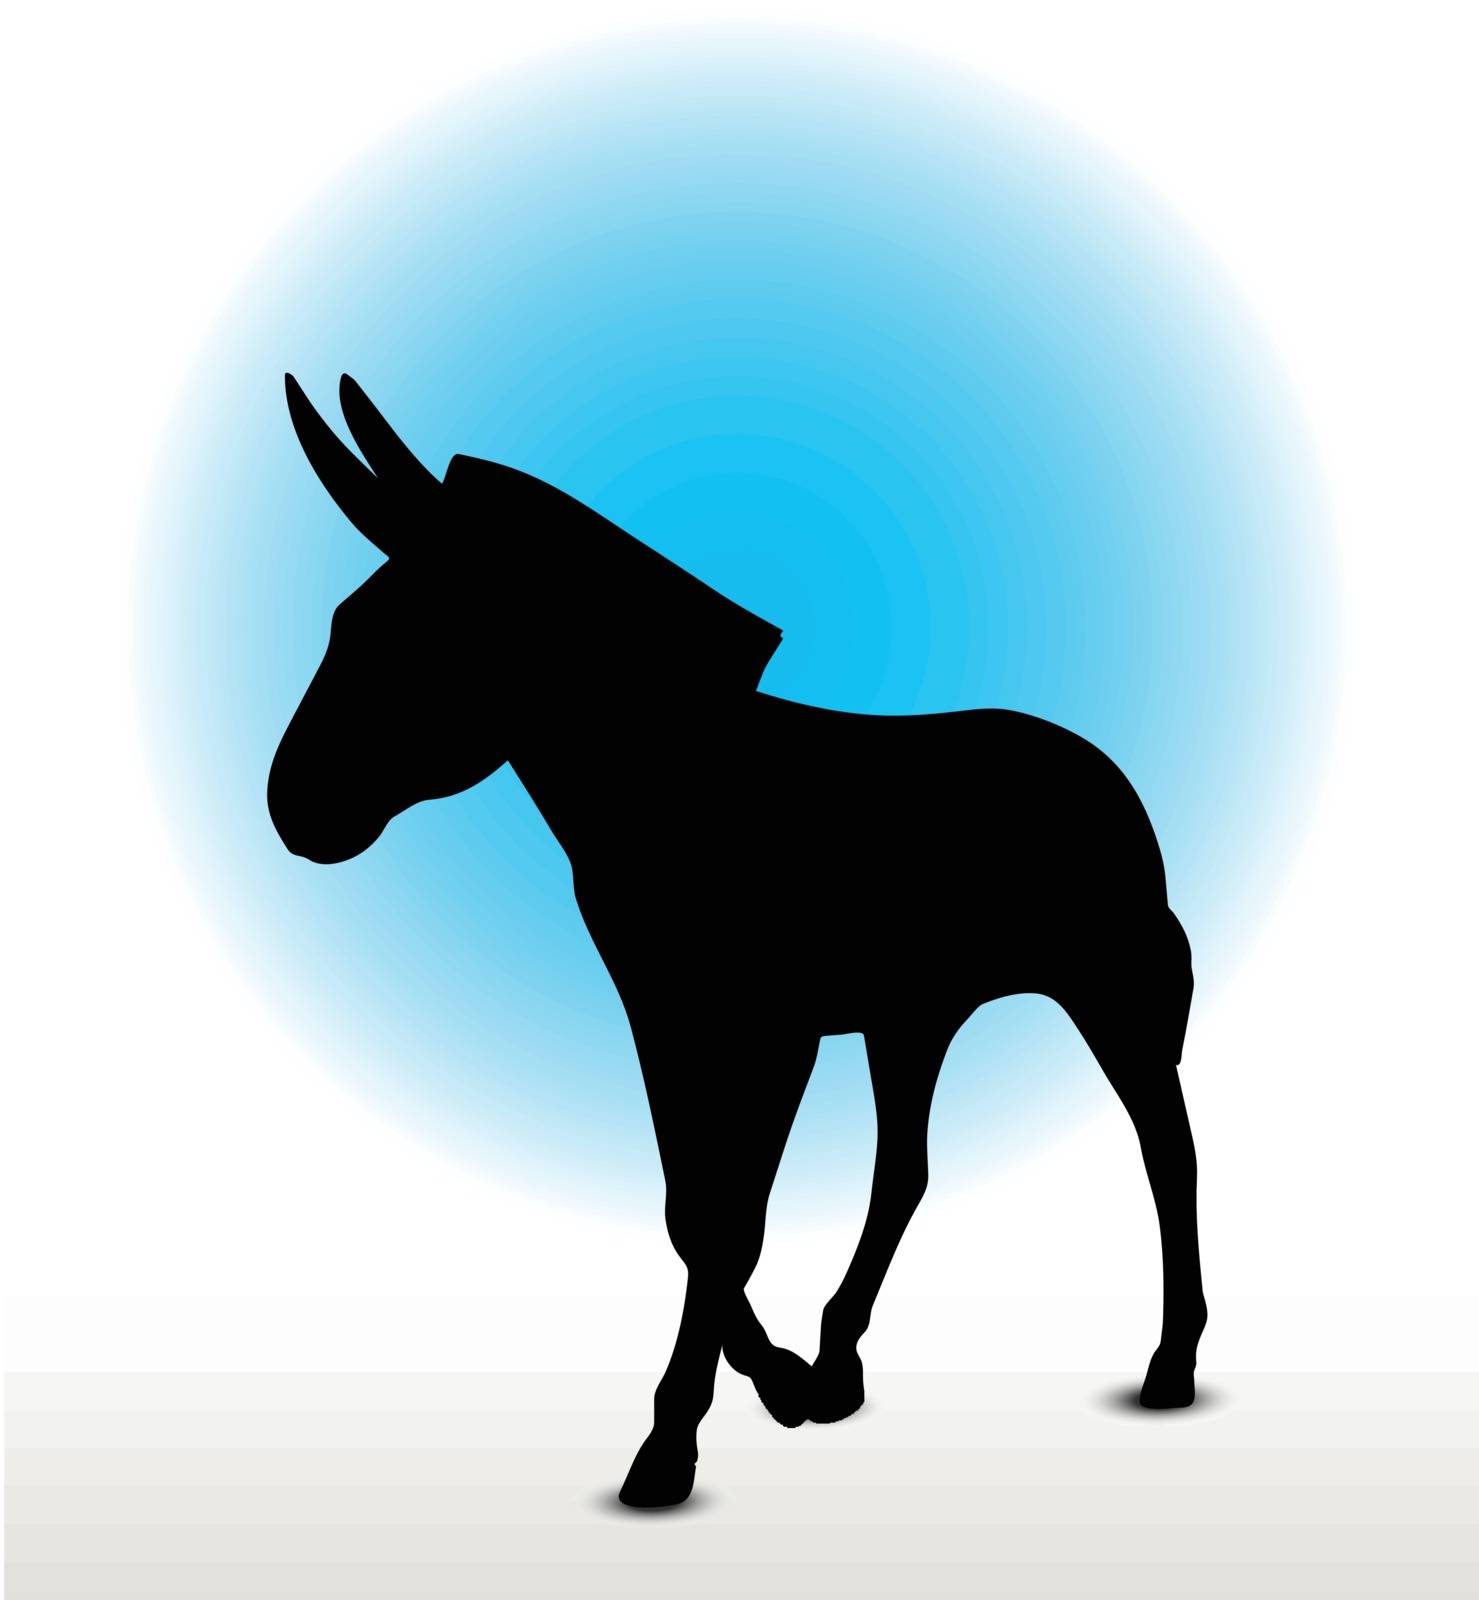 Vector Image, donkey silhouette, in walk pose, isolated on white background
